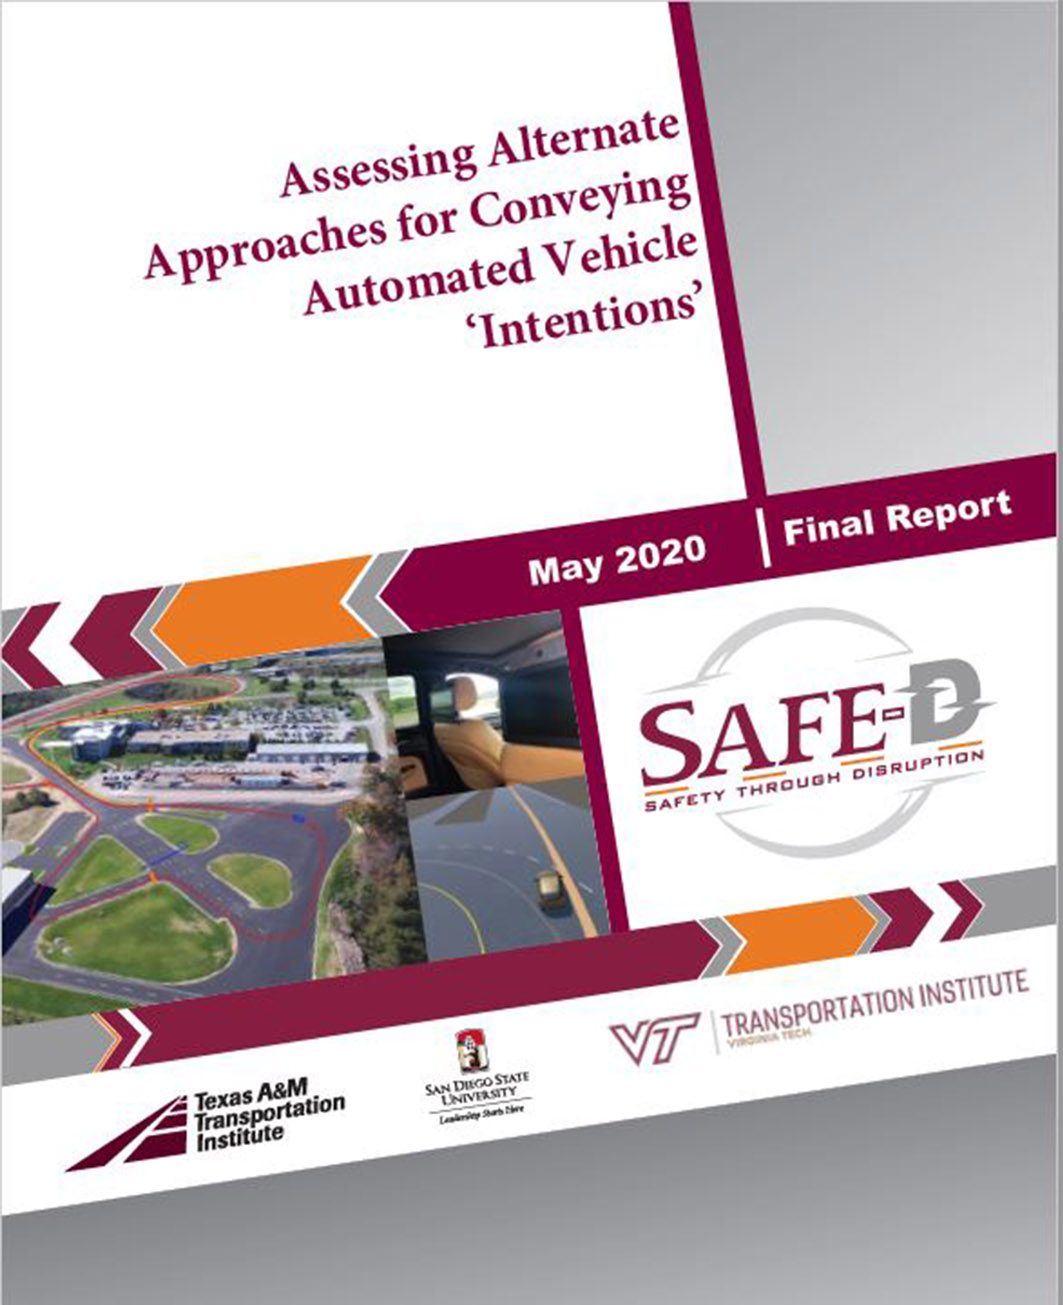 03-082 Assessing Alternate Approaches for Conveying Automated Vehicle  ‘Intentions’